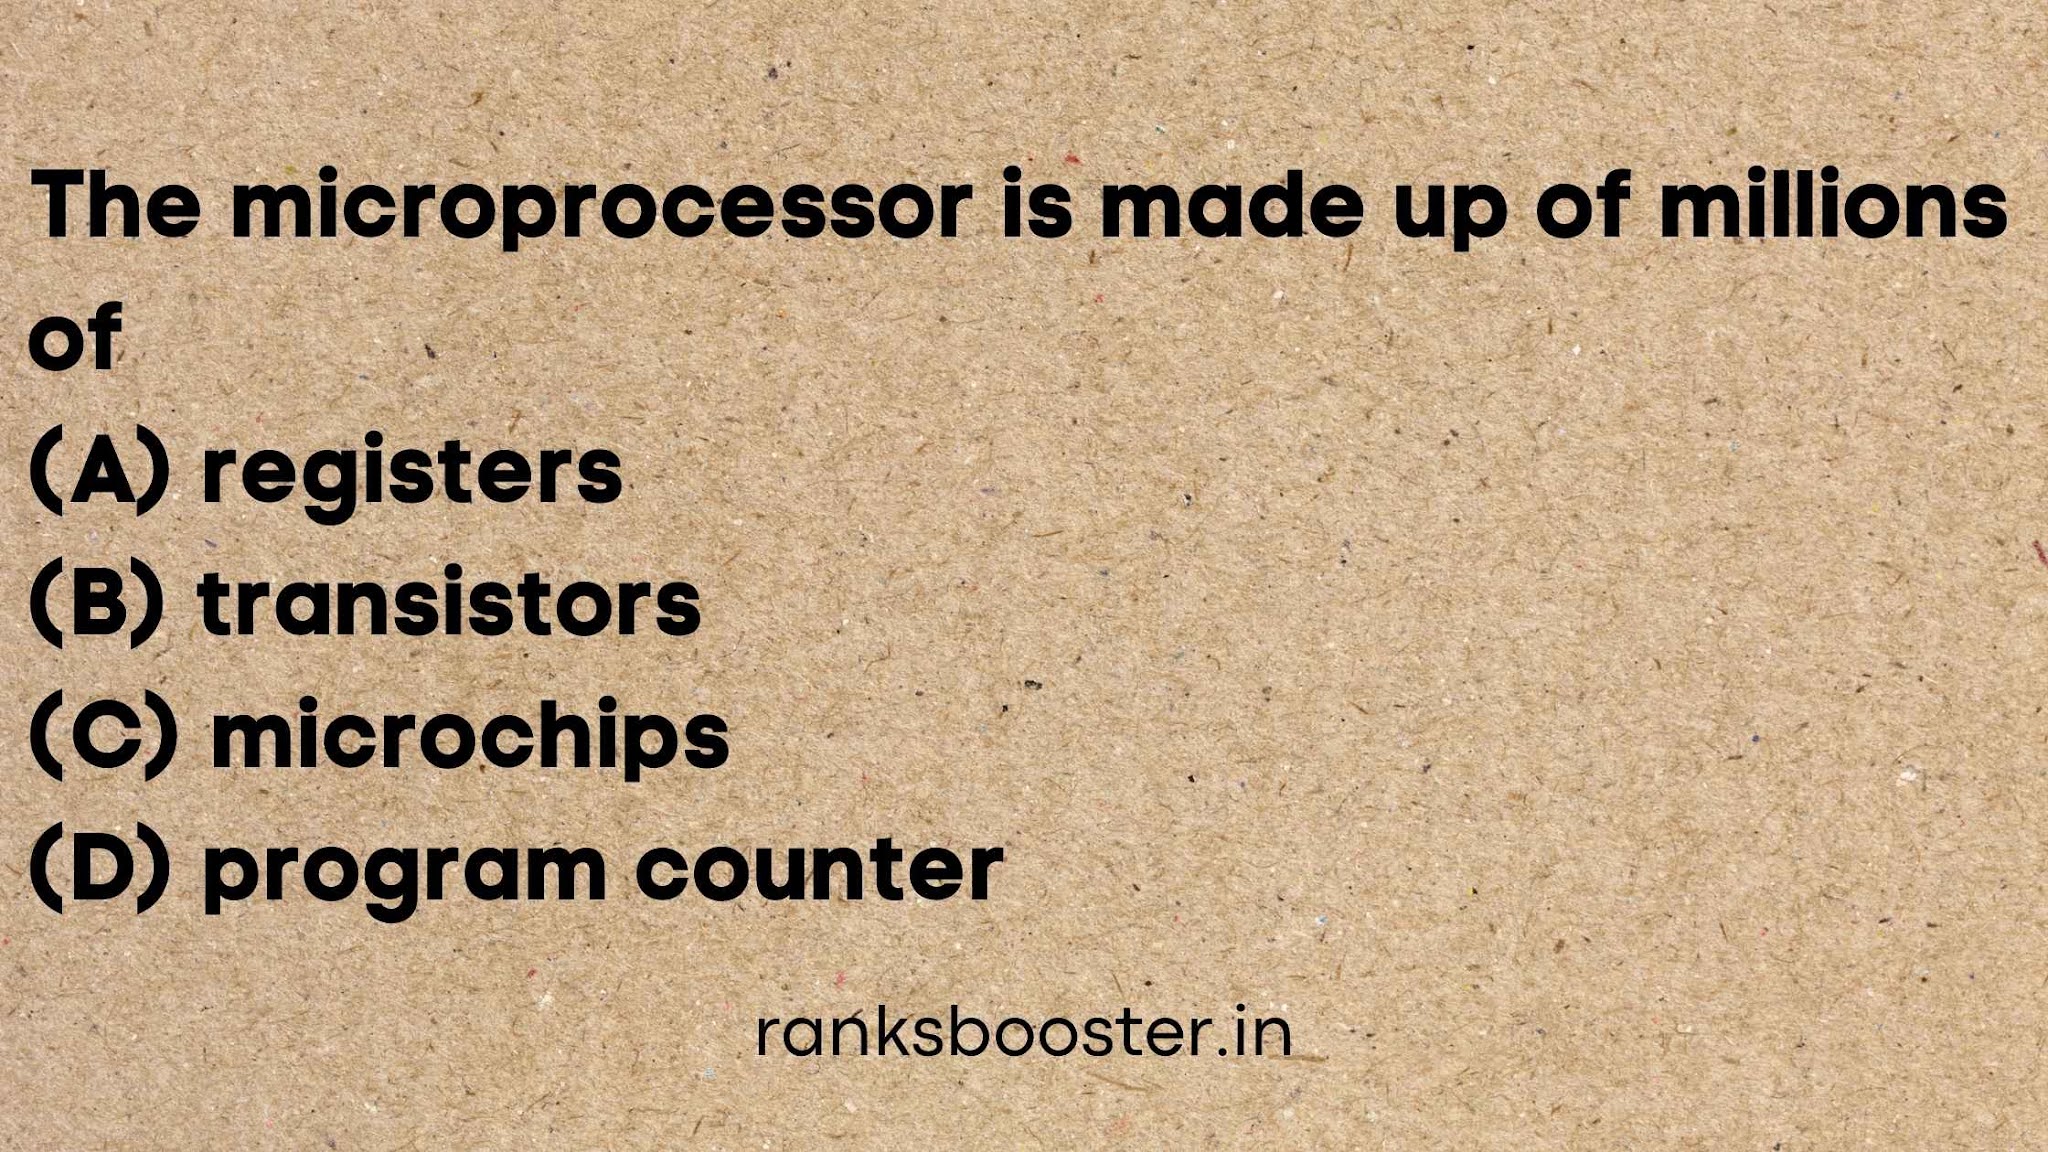 The microprocessor is made up of millions of (A) registers (B) transistors (C) microchips (D) program counter